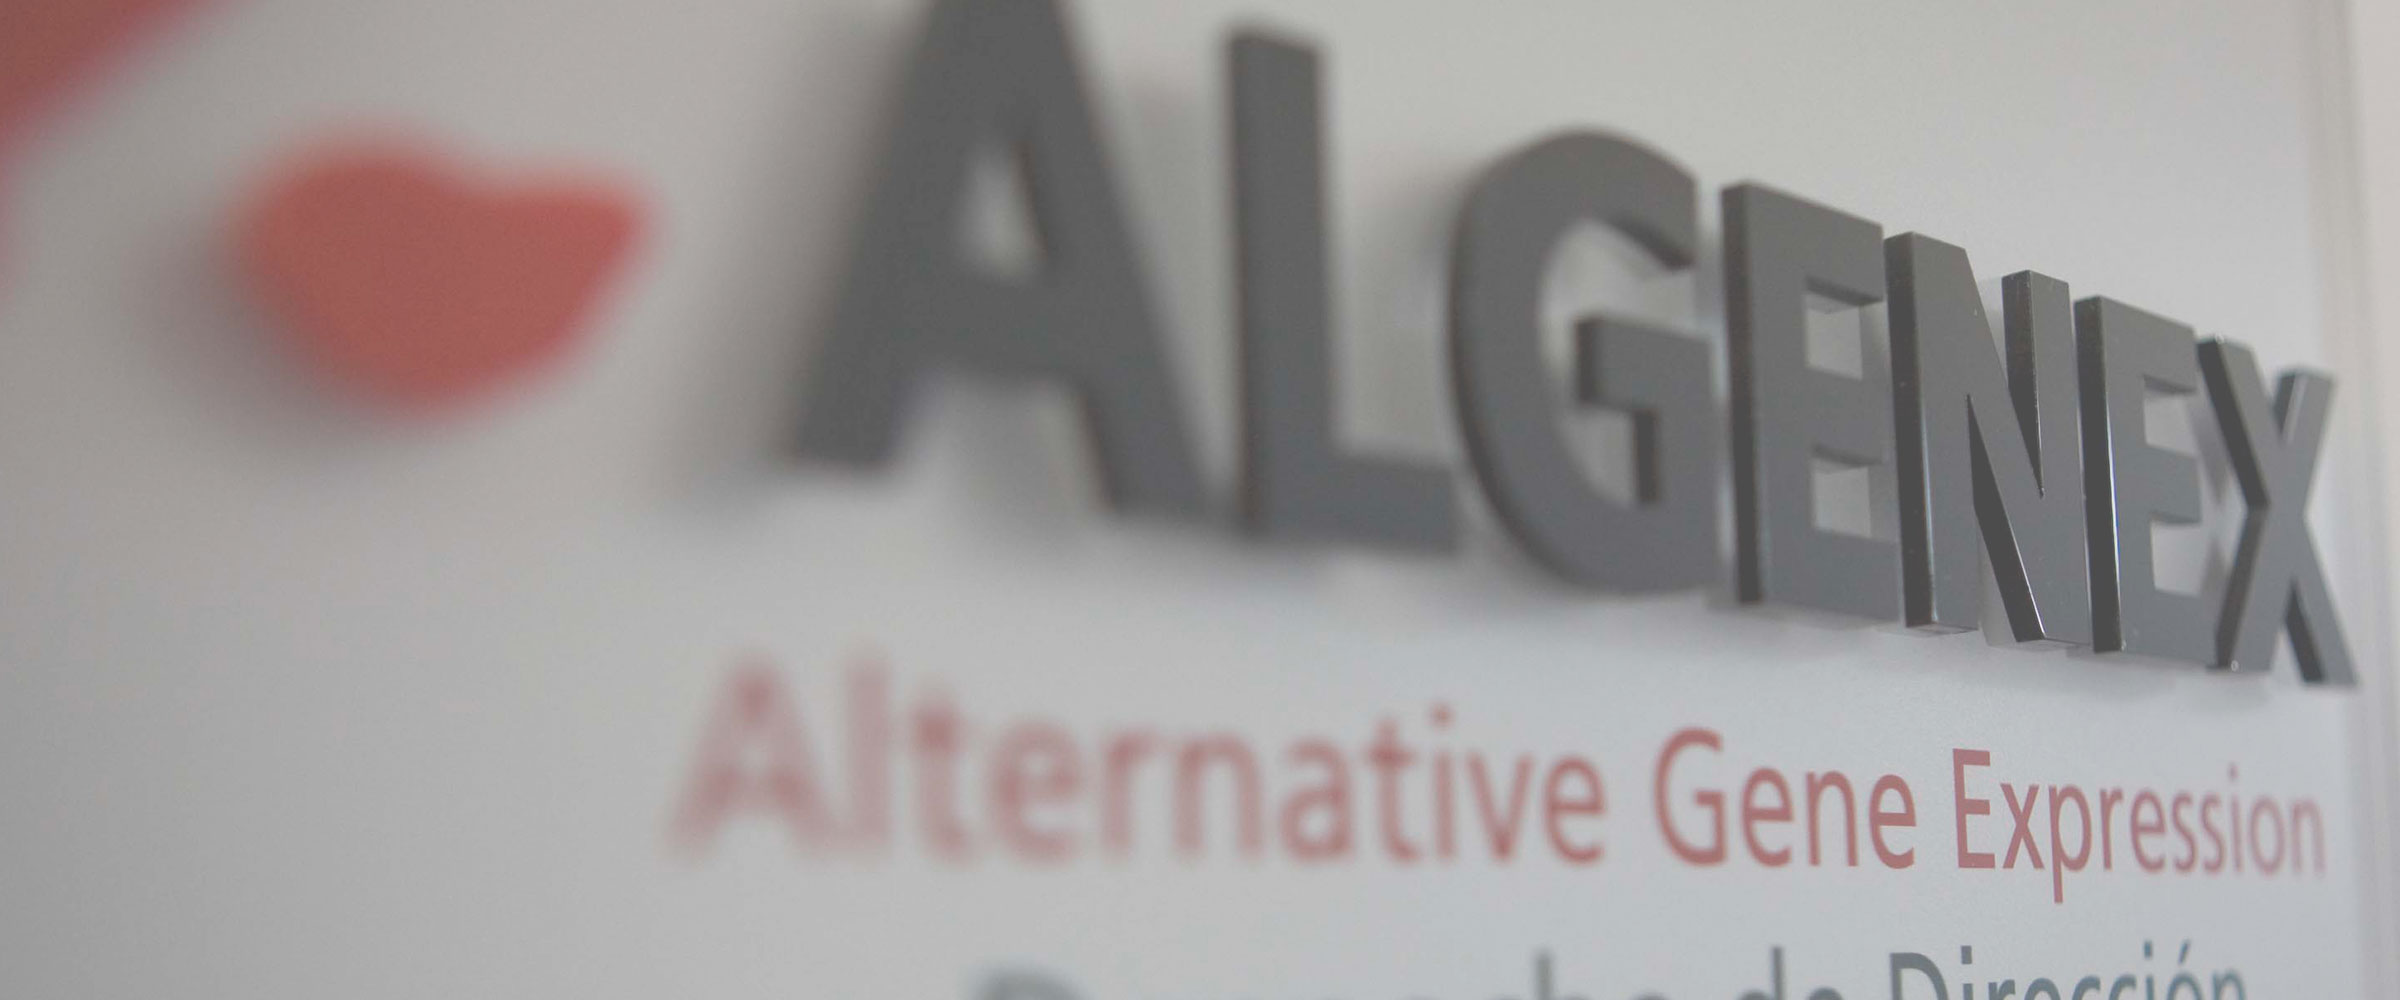 Algenex adds to Fatro relationship with second vaccine license